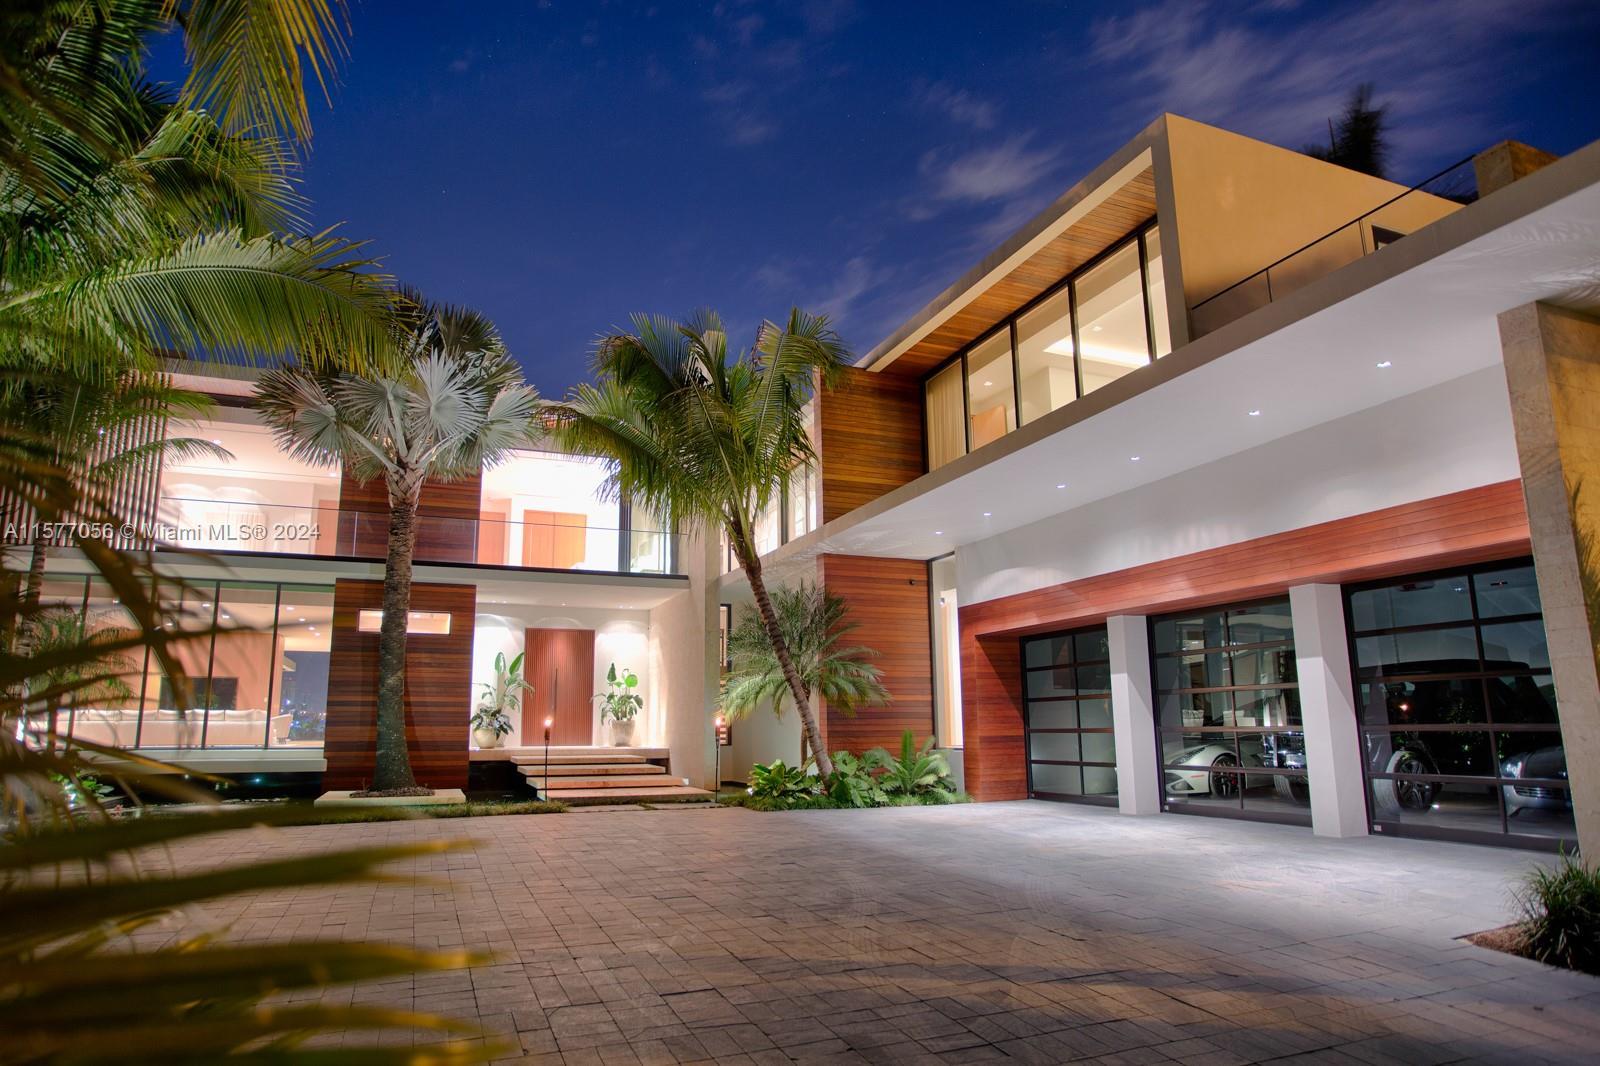 Stunning modern waterfront estate with unobstructed views of Downtown Miami Skyline located on Hibis